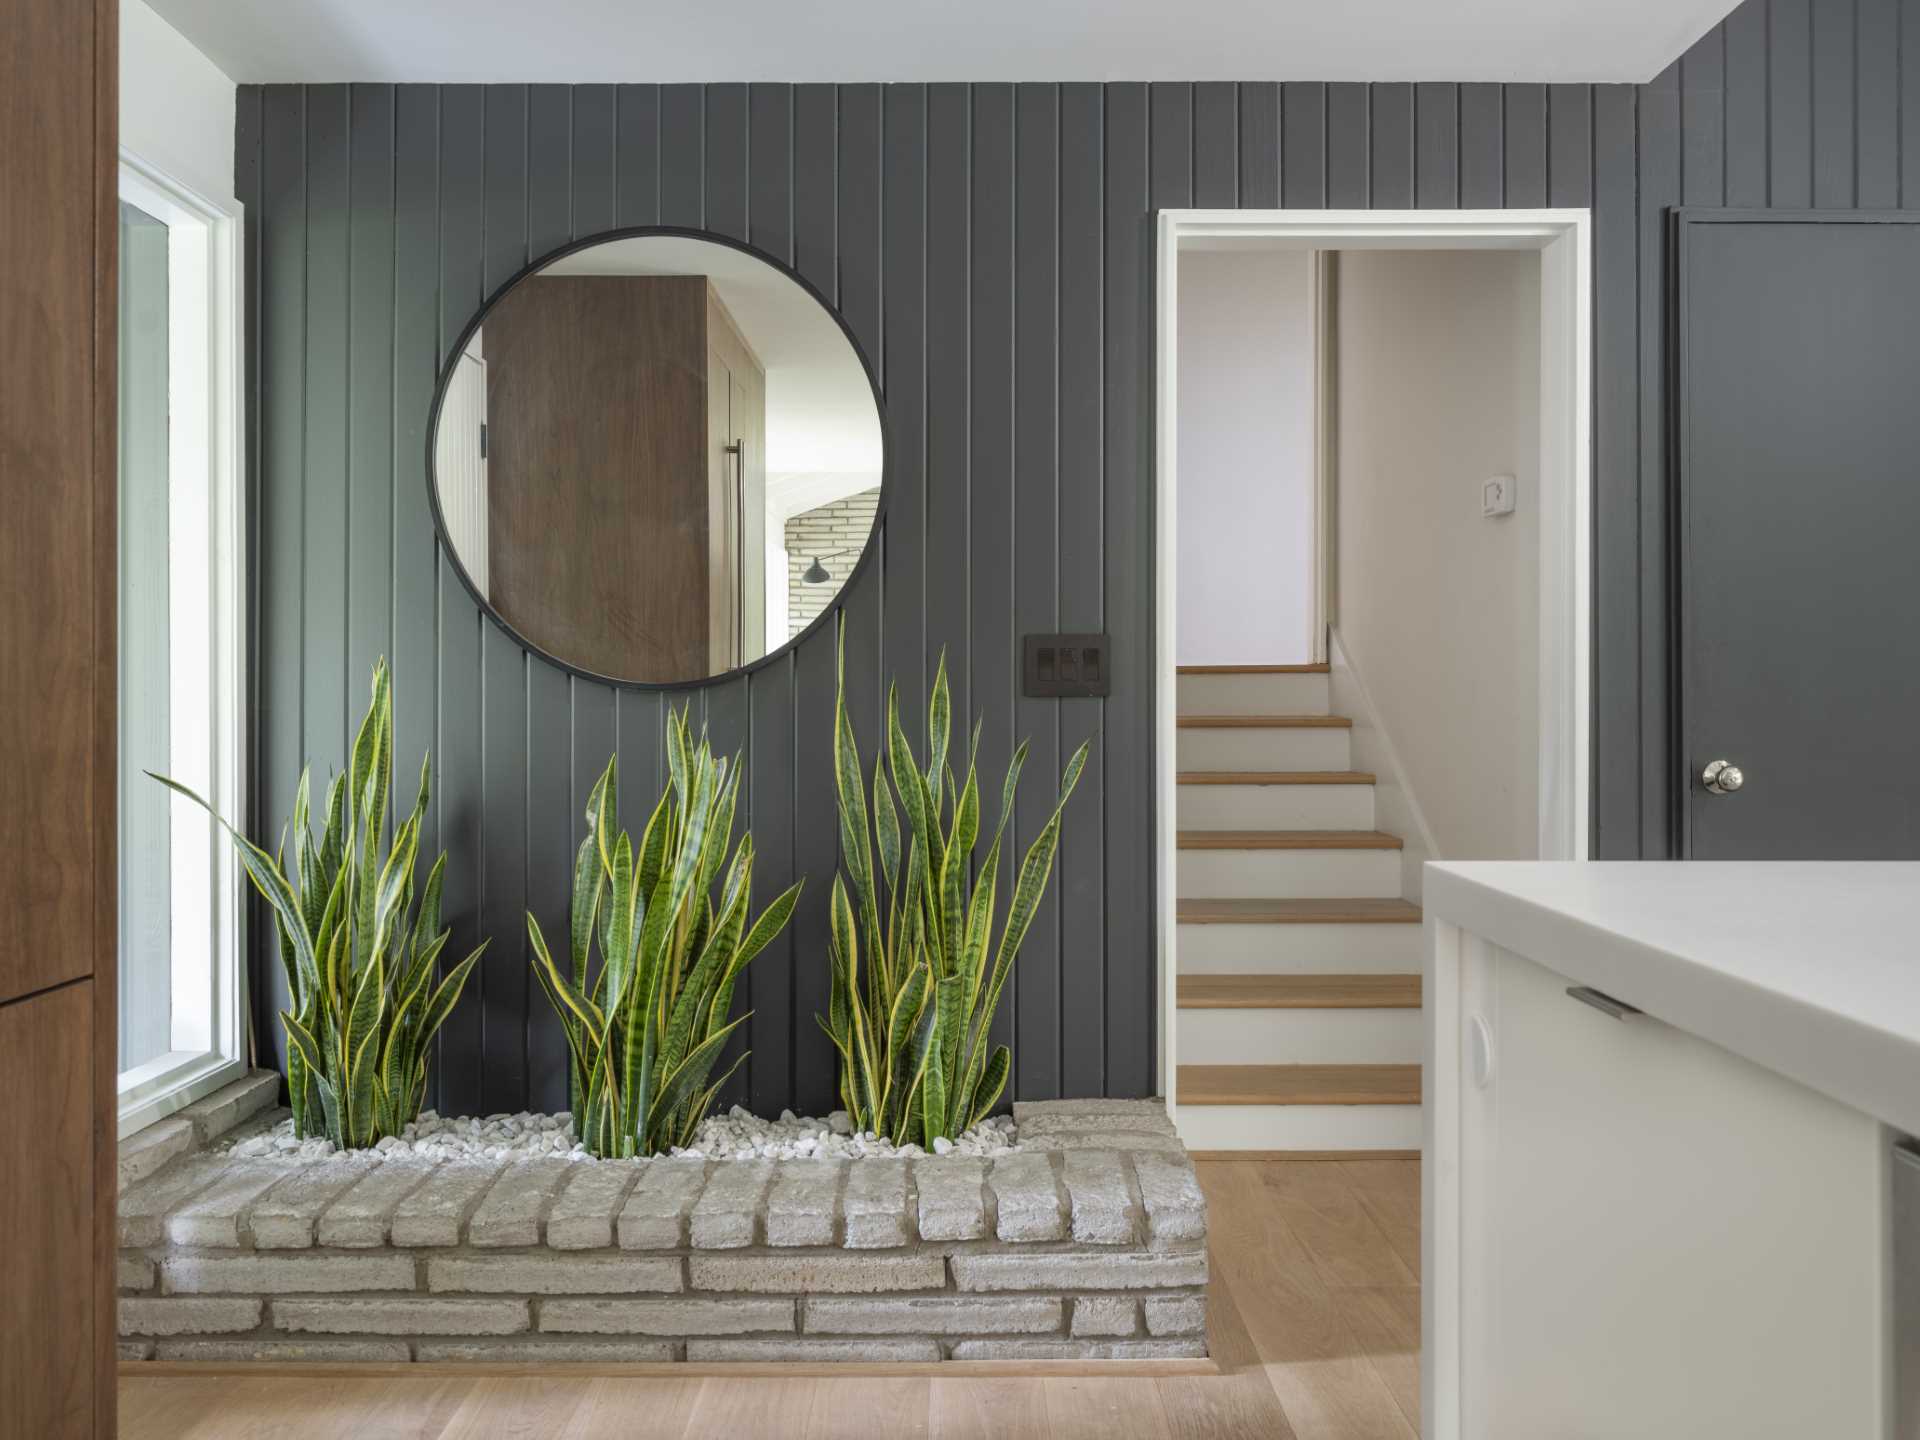 A renovated entryway kept the brick planter by the wall, but now the wood has been painted grey and light wood flooring has been added. A large round mirror helps to reflect light in the space.